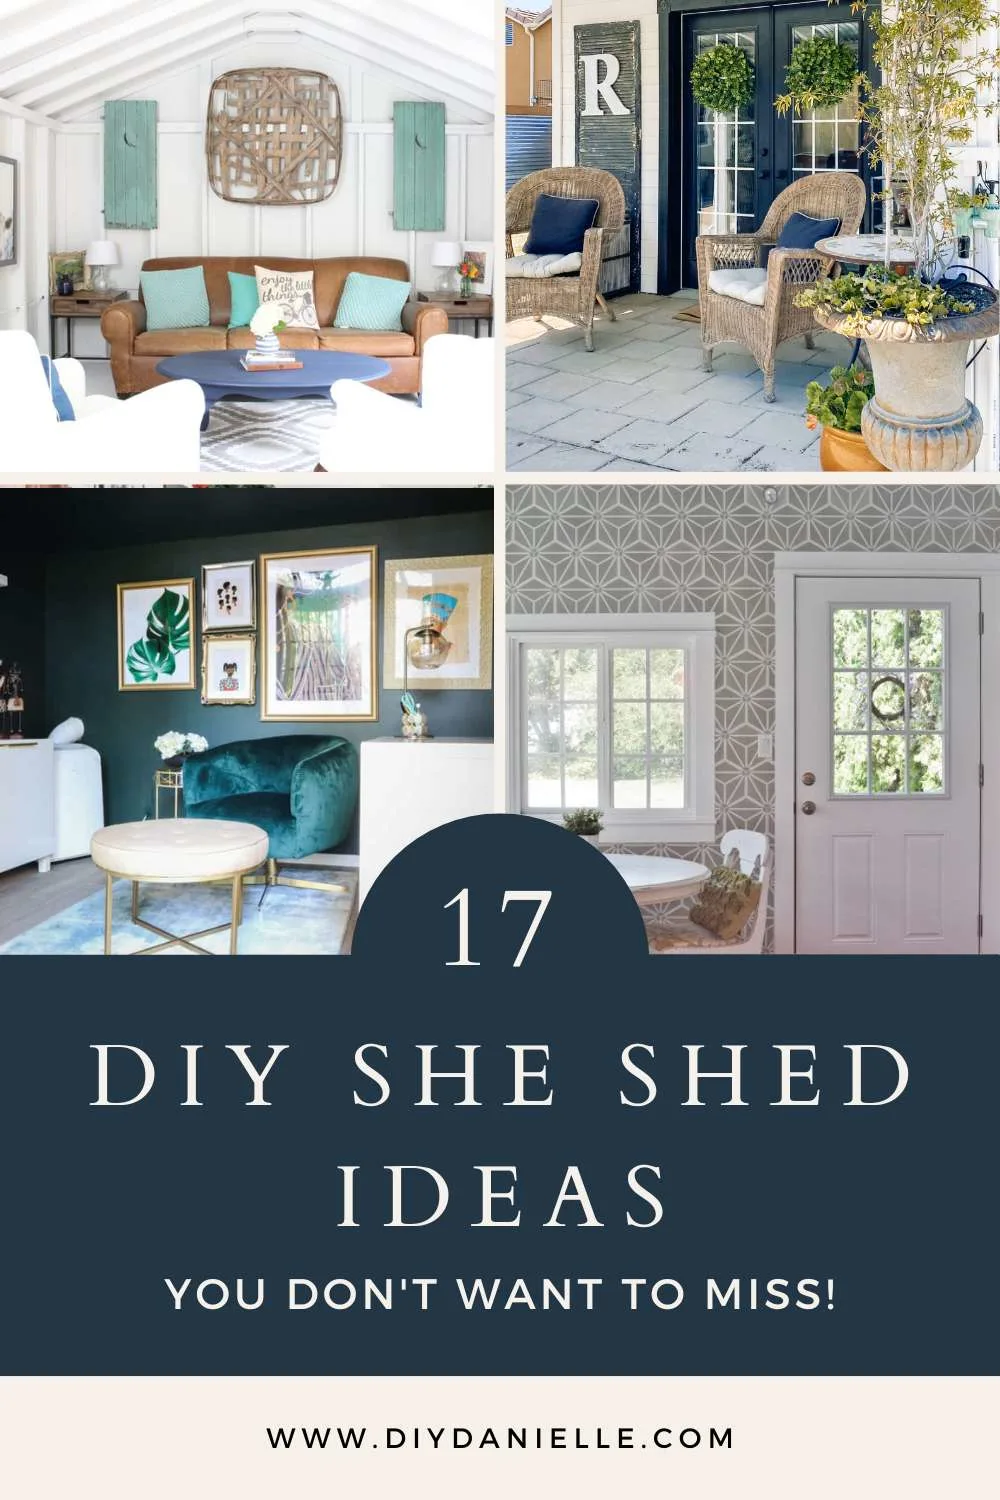 17 diy she shed ideas pin collage with text